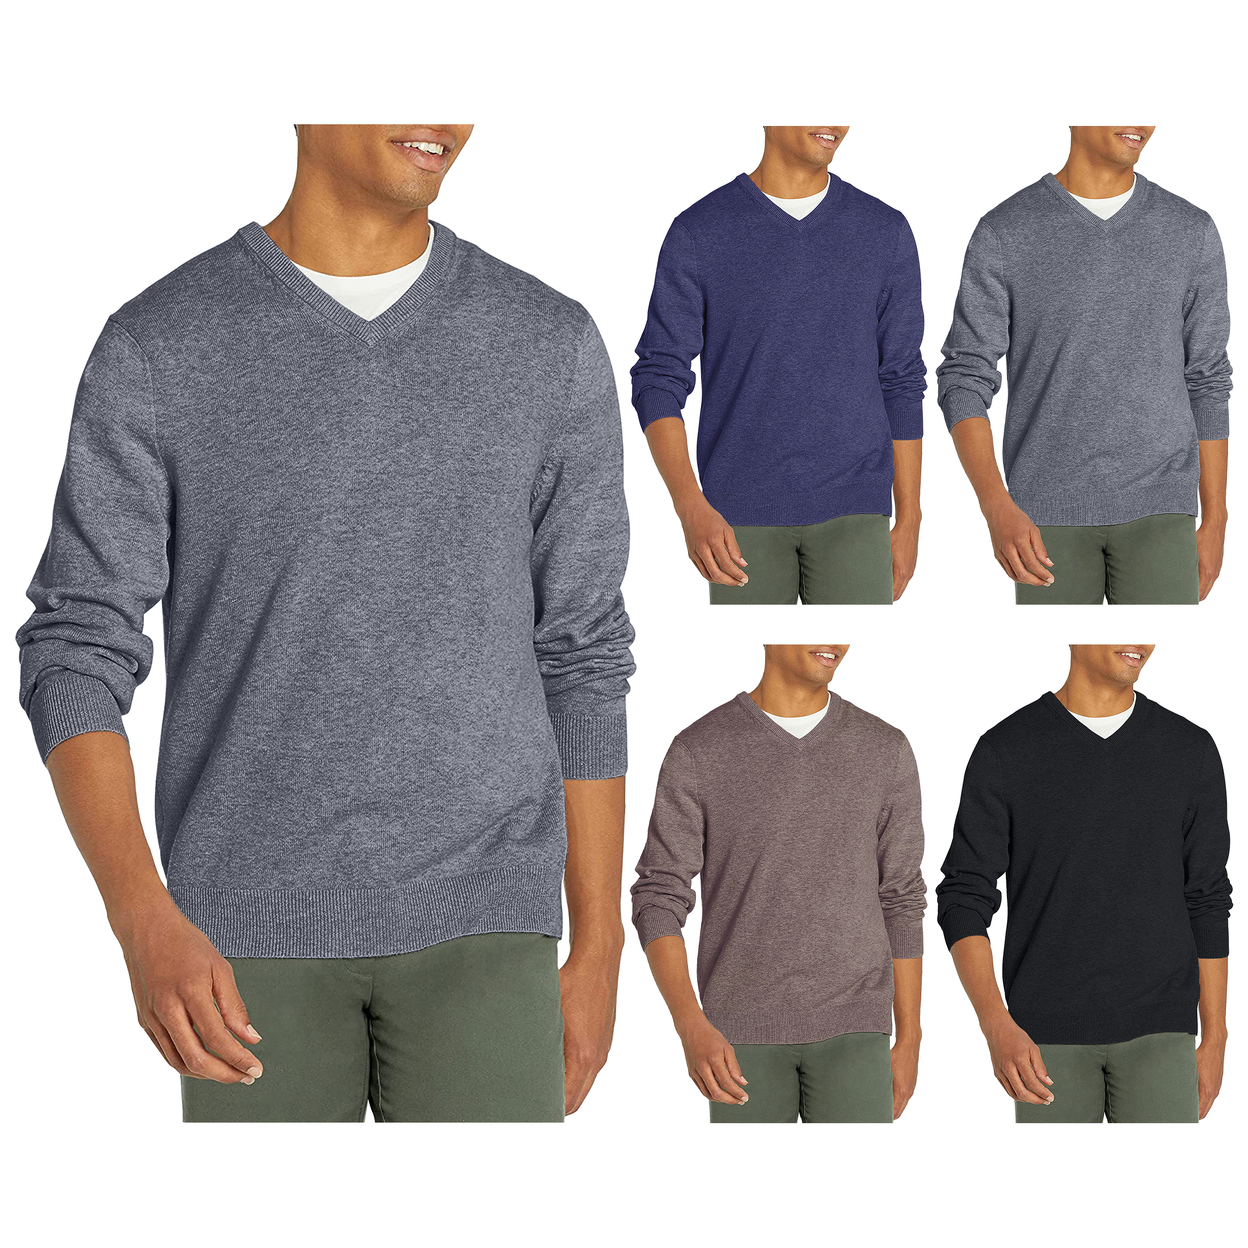 Men's Casual Ultra-Soft Slim Fit Warm Knit V-Neck Sweater - Blue, Small